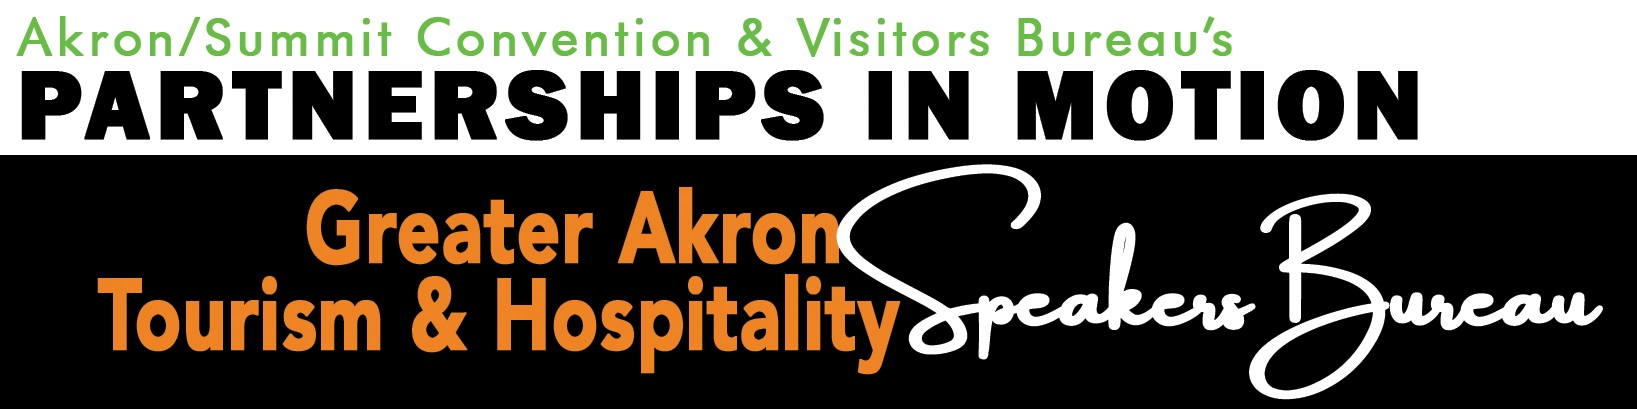 ASCVB Partners in Motion - Great Akron Tourism & Hospitality Speakers Bureau